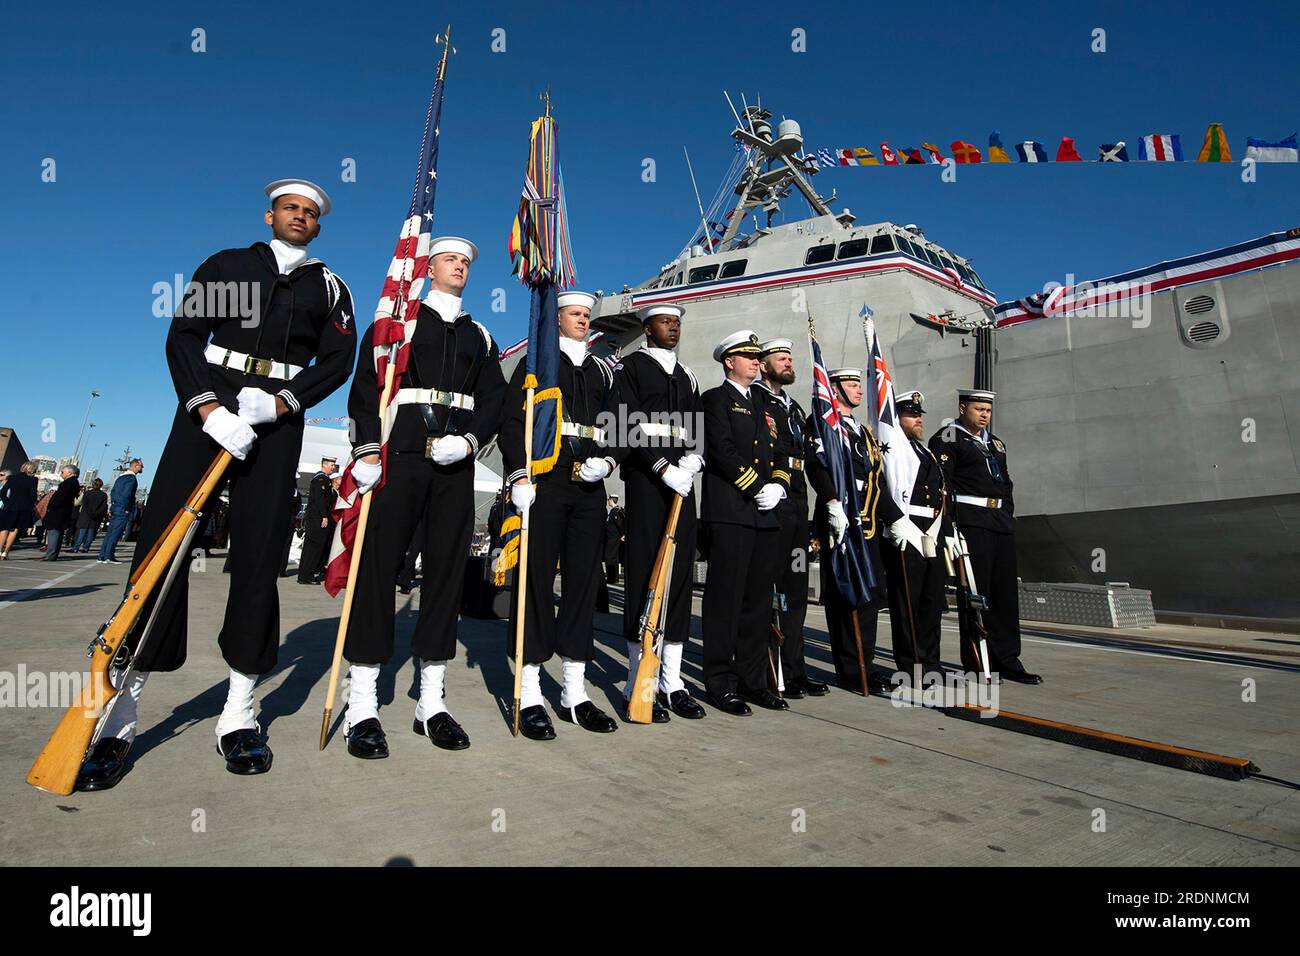 Sydney, Australia. 22nd July, 2023. U.S. Navy Ceremonial Guard and the Royal Australian Navy ceremonial guard line up by the Independence-variant littoral combat ship USS Canberra before the commissioning ceremony, July 22, 2023 in Sydney, Australia. The USS Canberra, namesake ship of the capitol of Australia, was formally commissioning during the ceremony. Credit: EJ Hersom/U.S Navy Photo/Alamy Live News Stock Photo